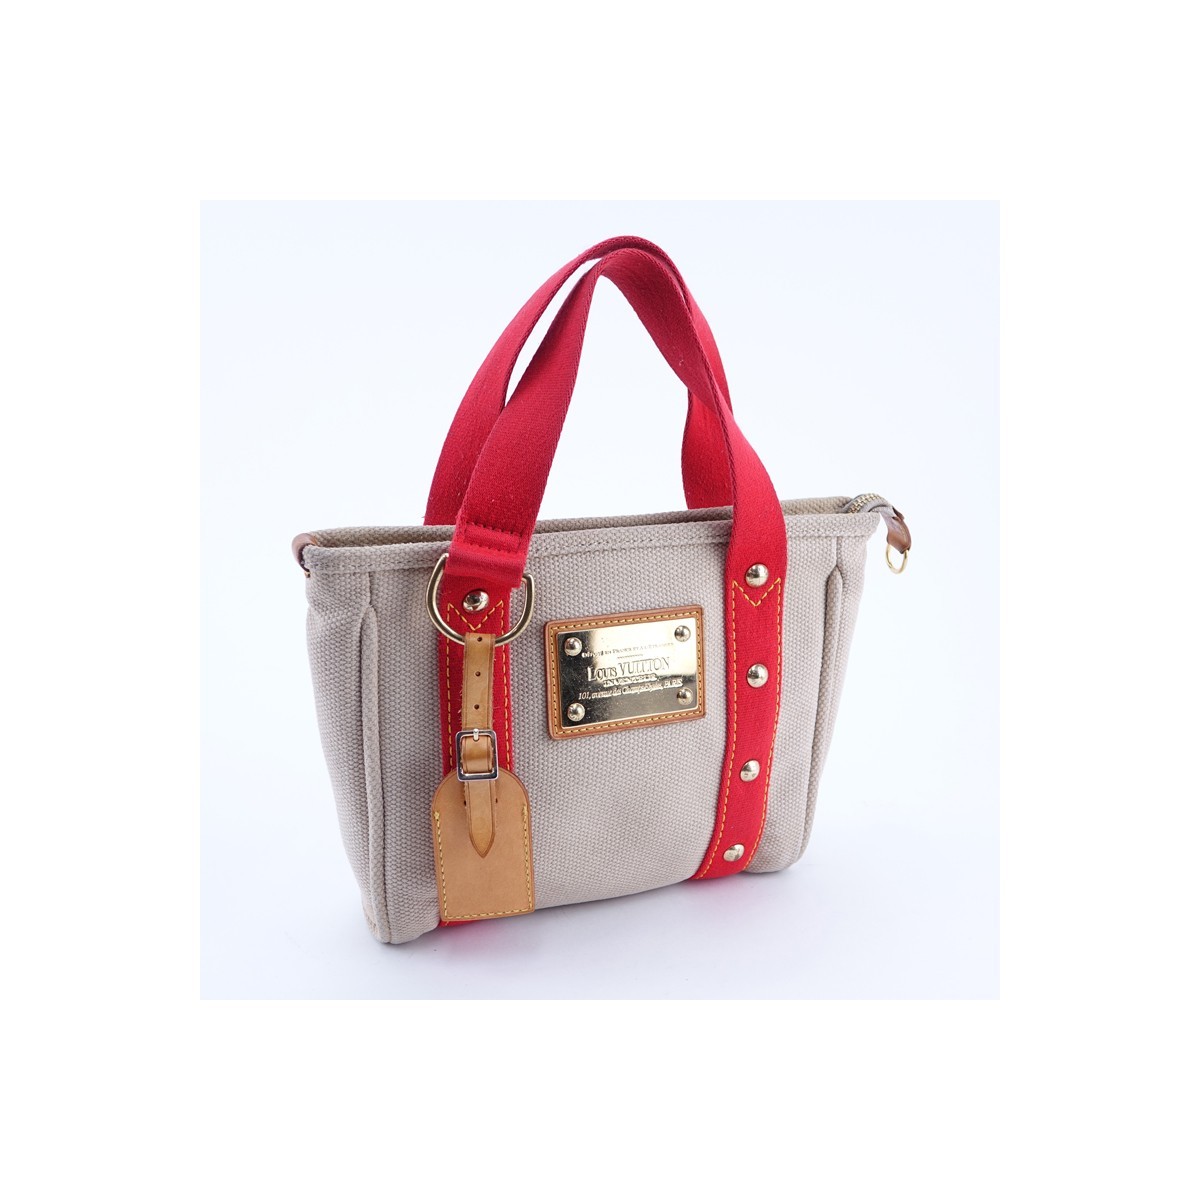 Louis Vuitton Beige/Red Canvas Antigua Cabas PM Tote. Golden brass hardware, striped fabric interior with patch pockets.